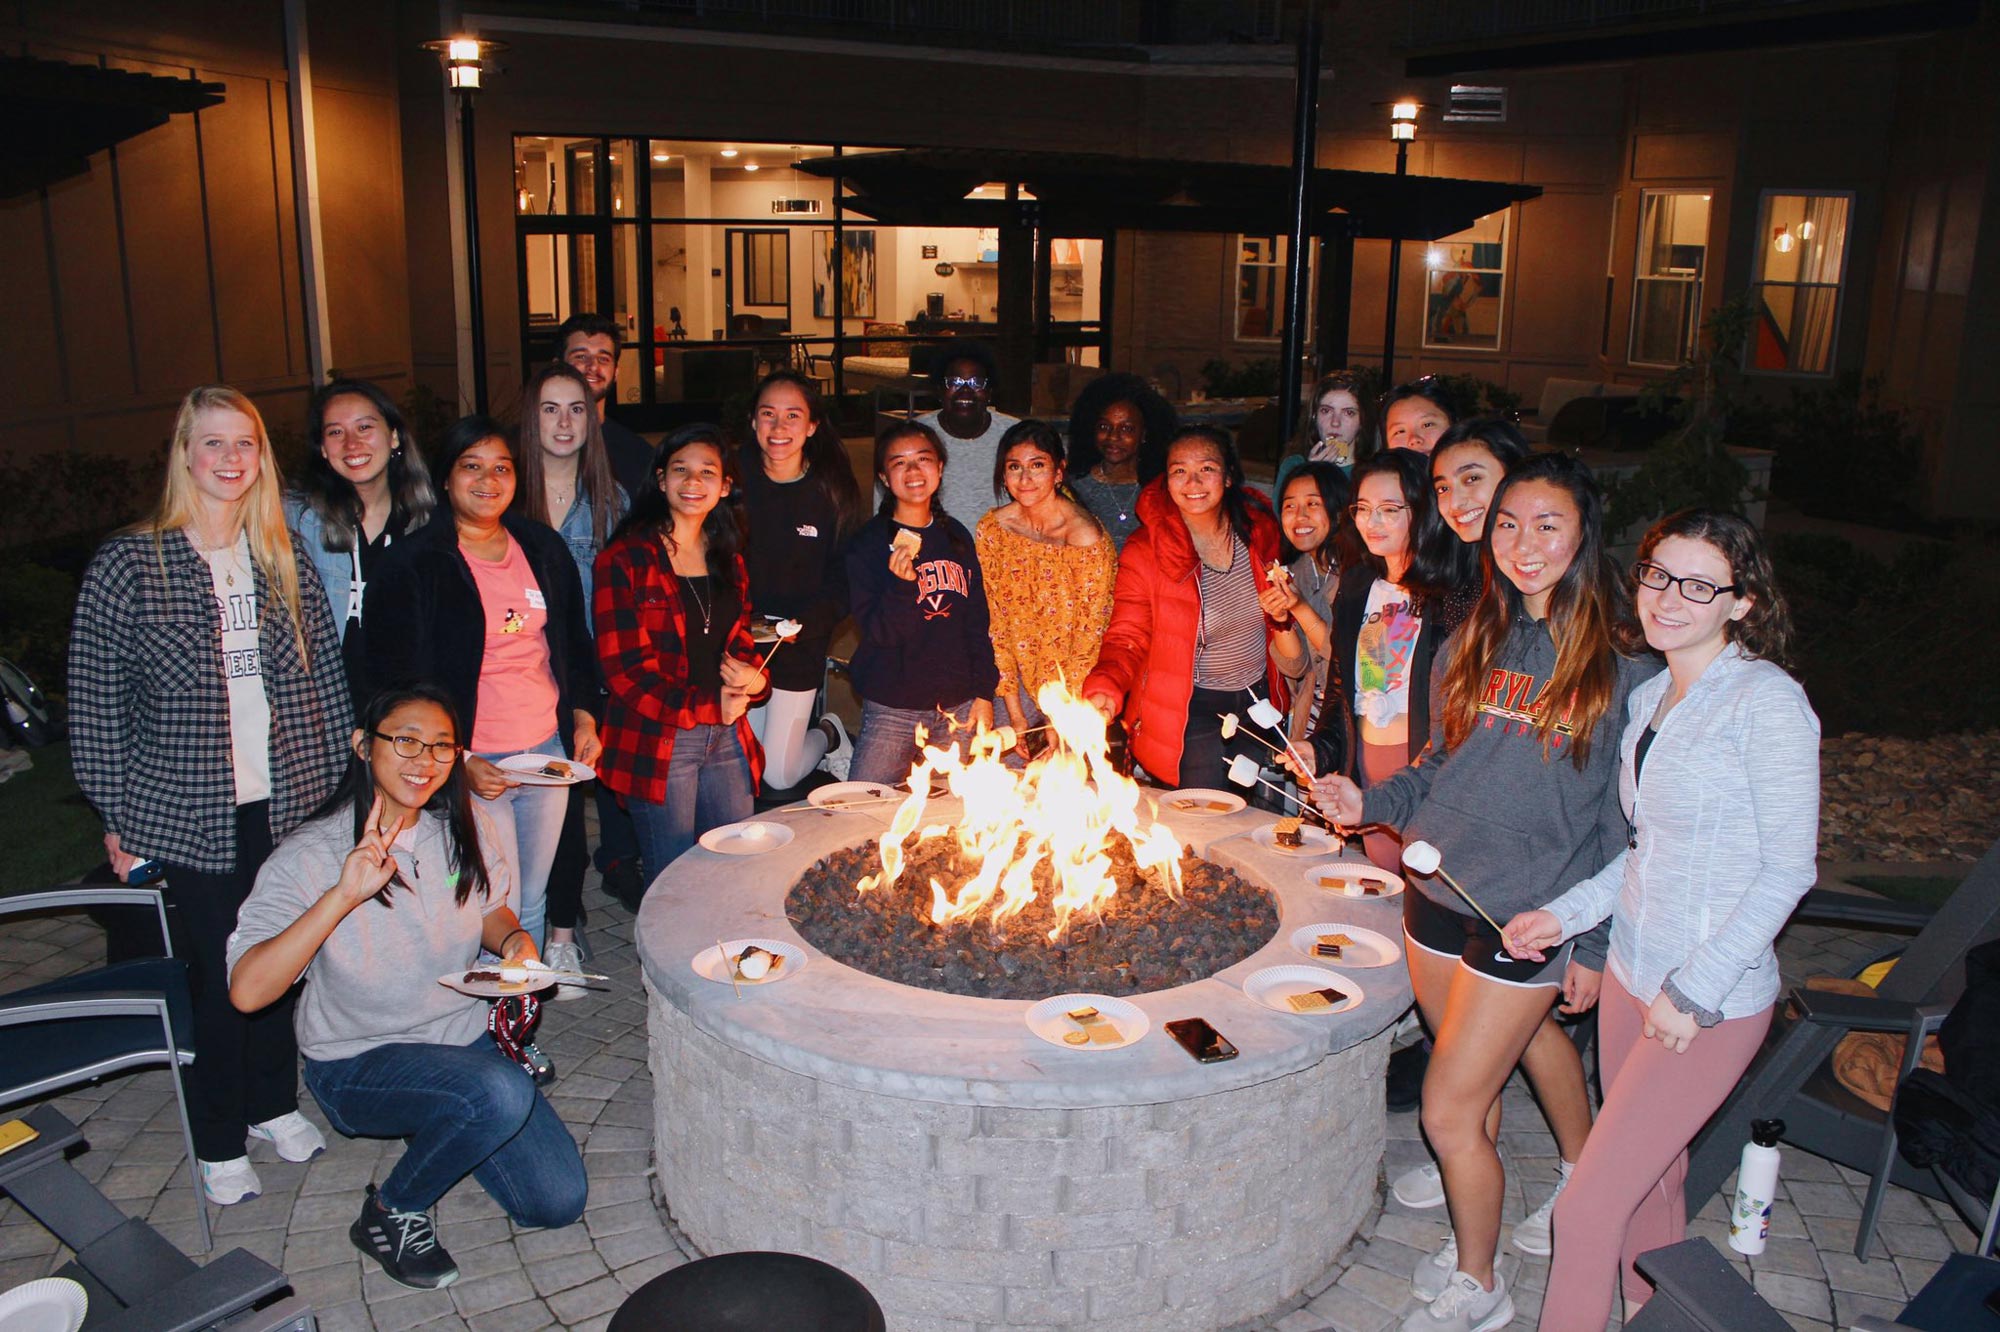 Girls Who Code participants surround a fire pit making smore's